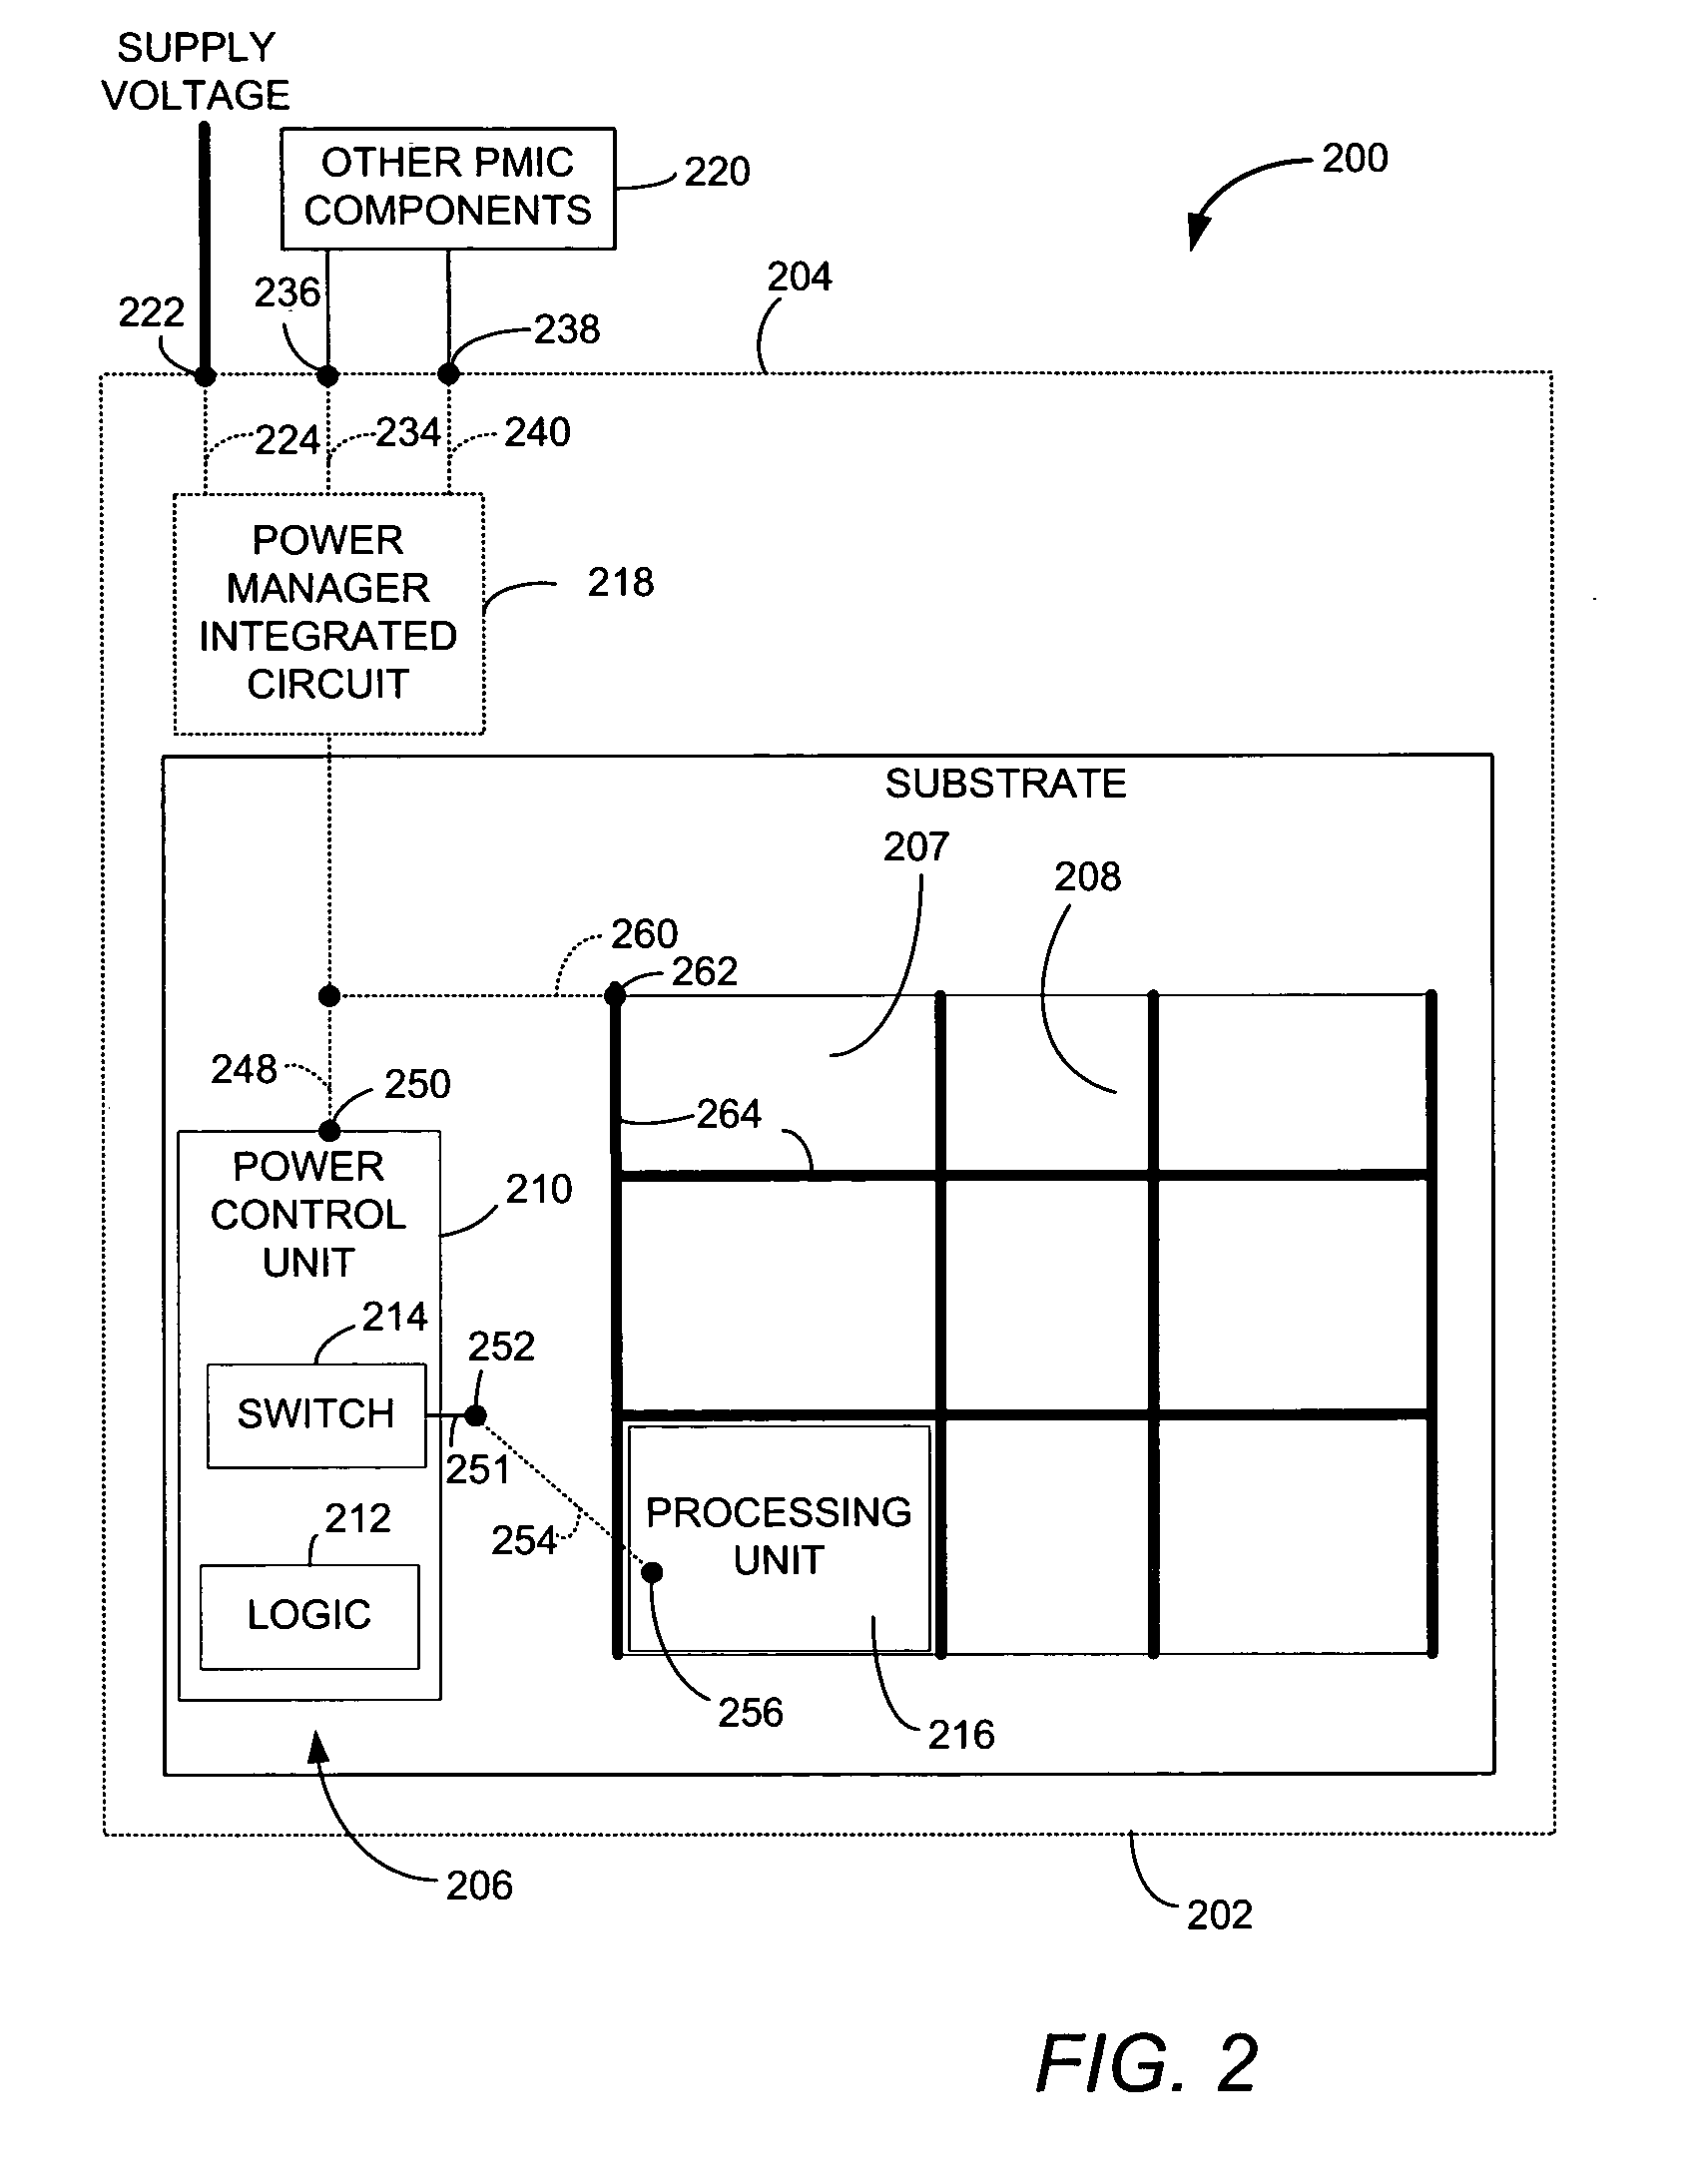 System and method of silicon switched power delivery using a package